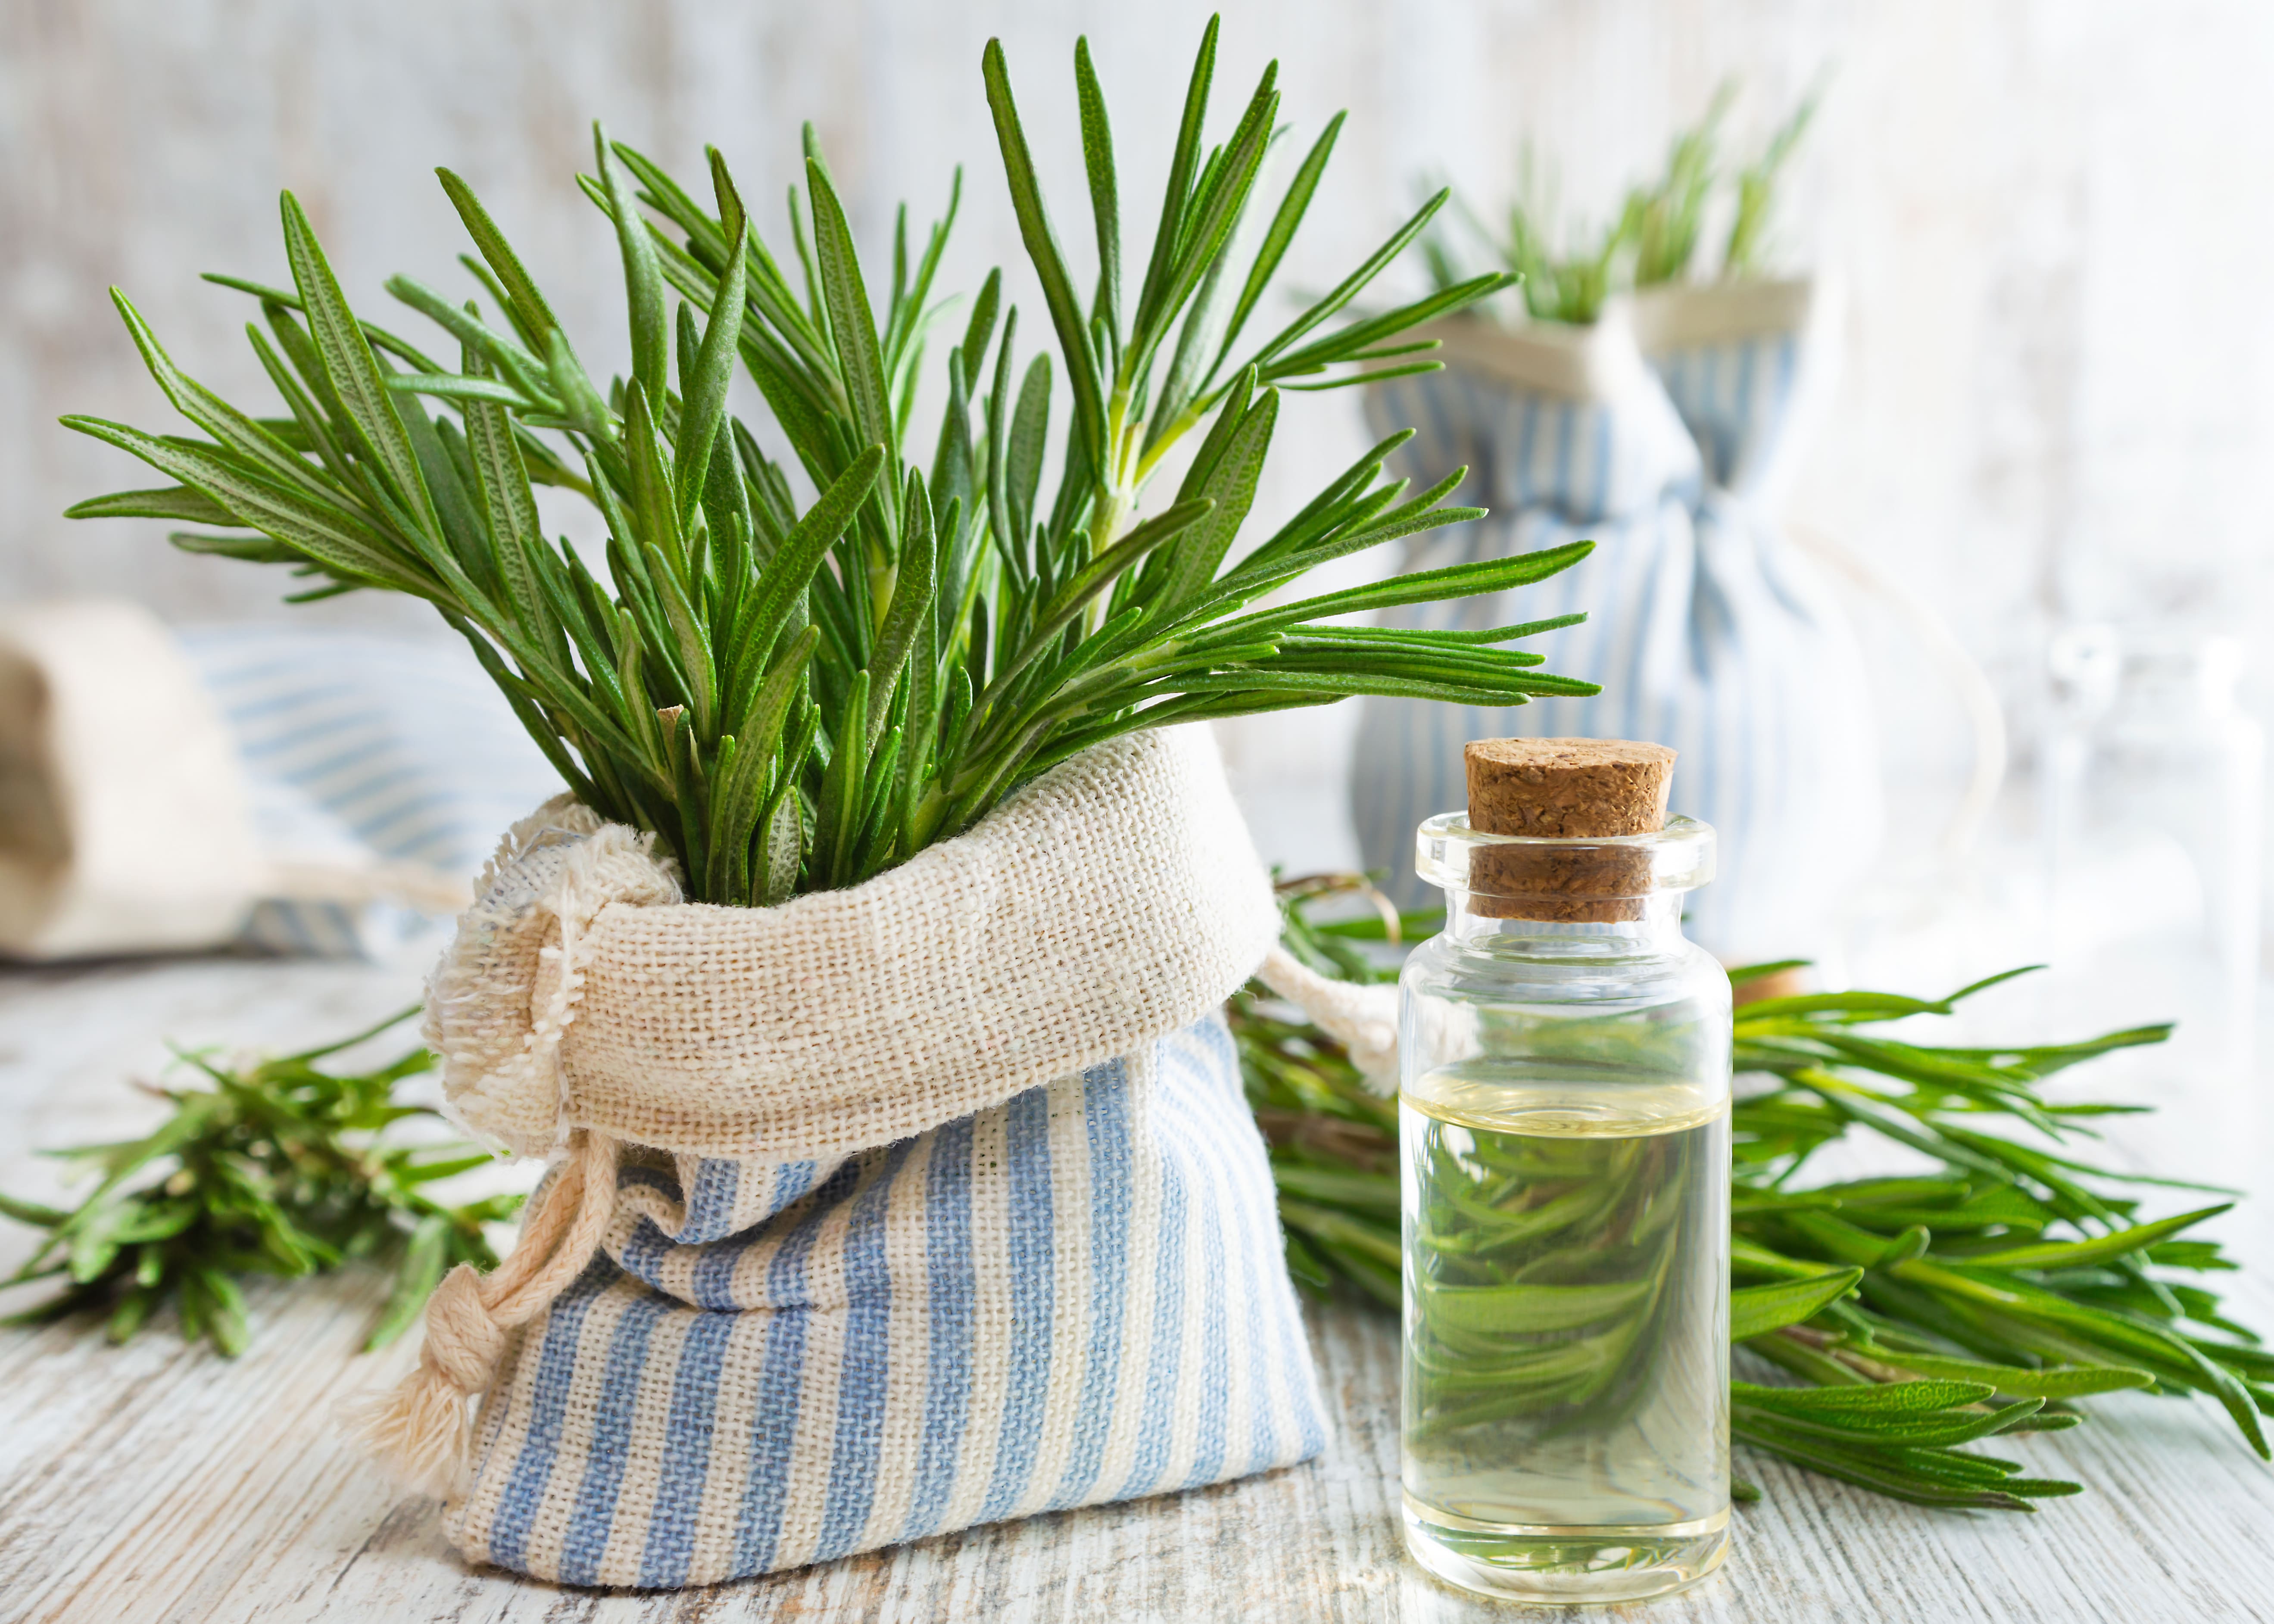 Rosemary essential oil and fresh rosemary in decorative pouch on old wooden table.